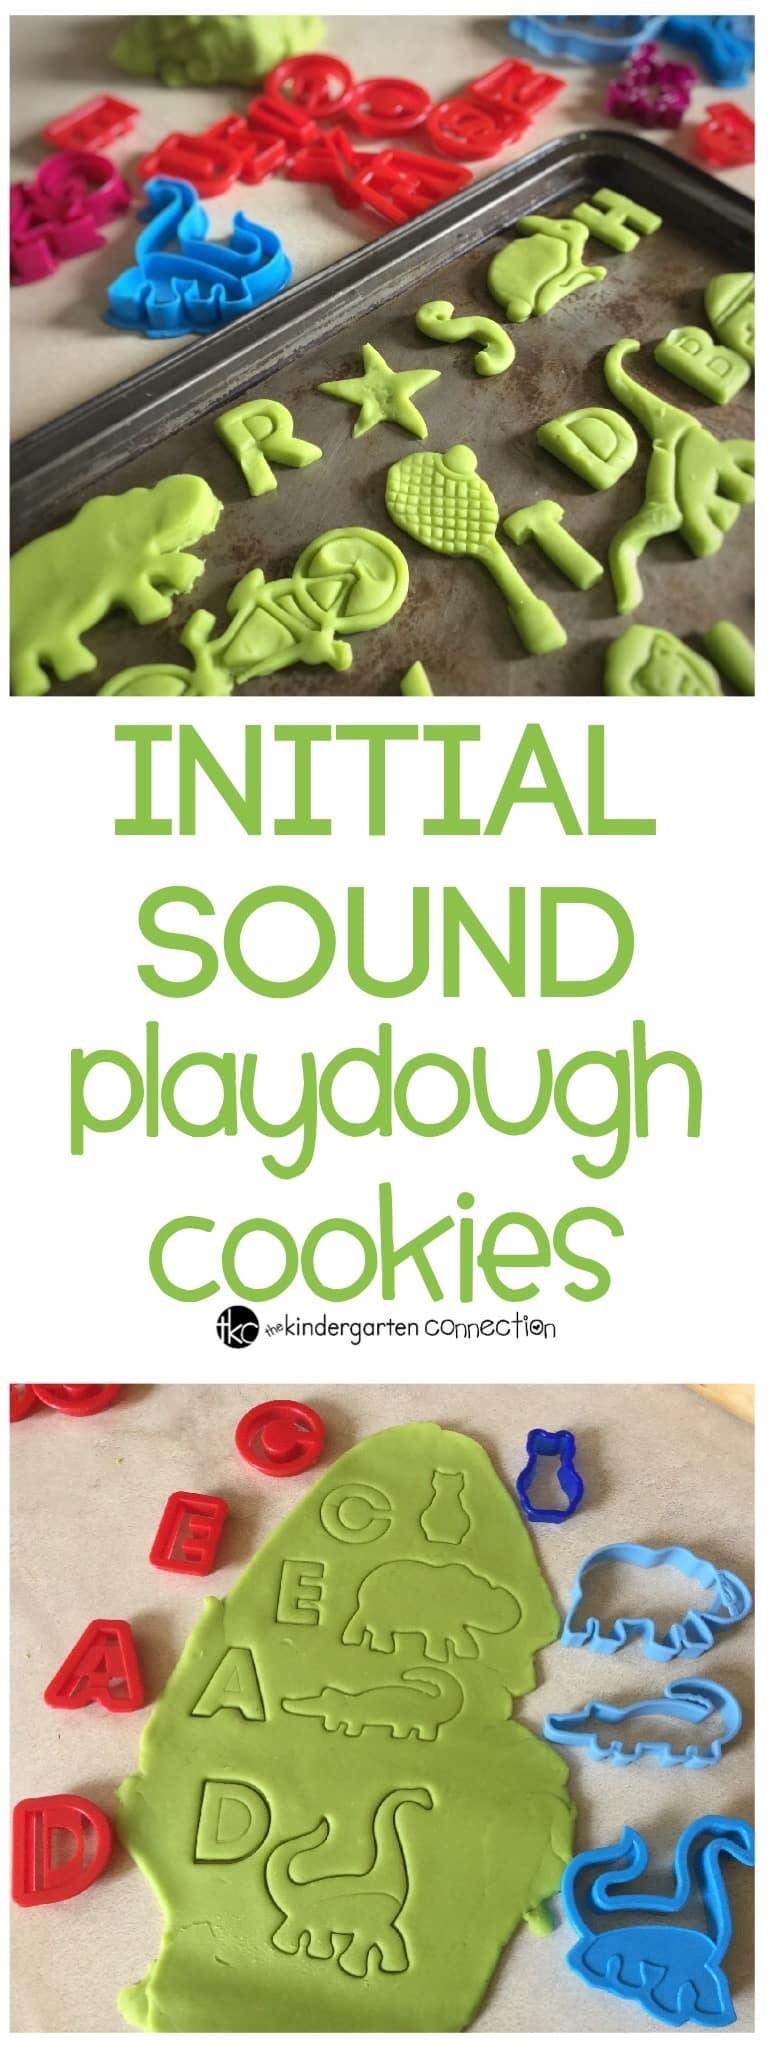 Playdough is so versatile and makes a great sensory material to use for learning. Use playdough for this fun initial sound playdough cookies activity!